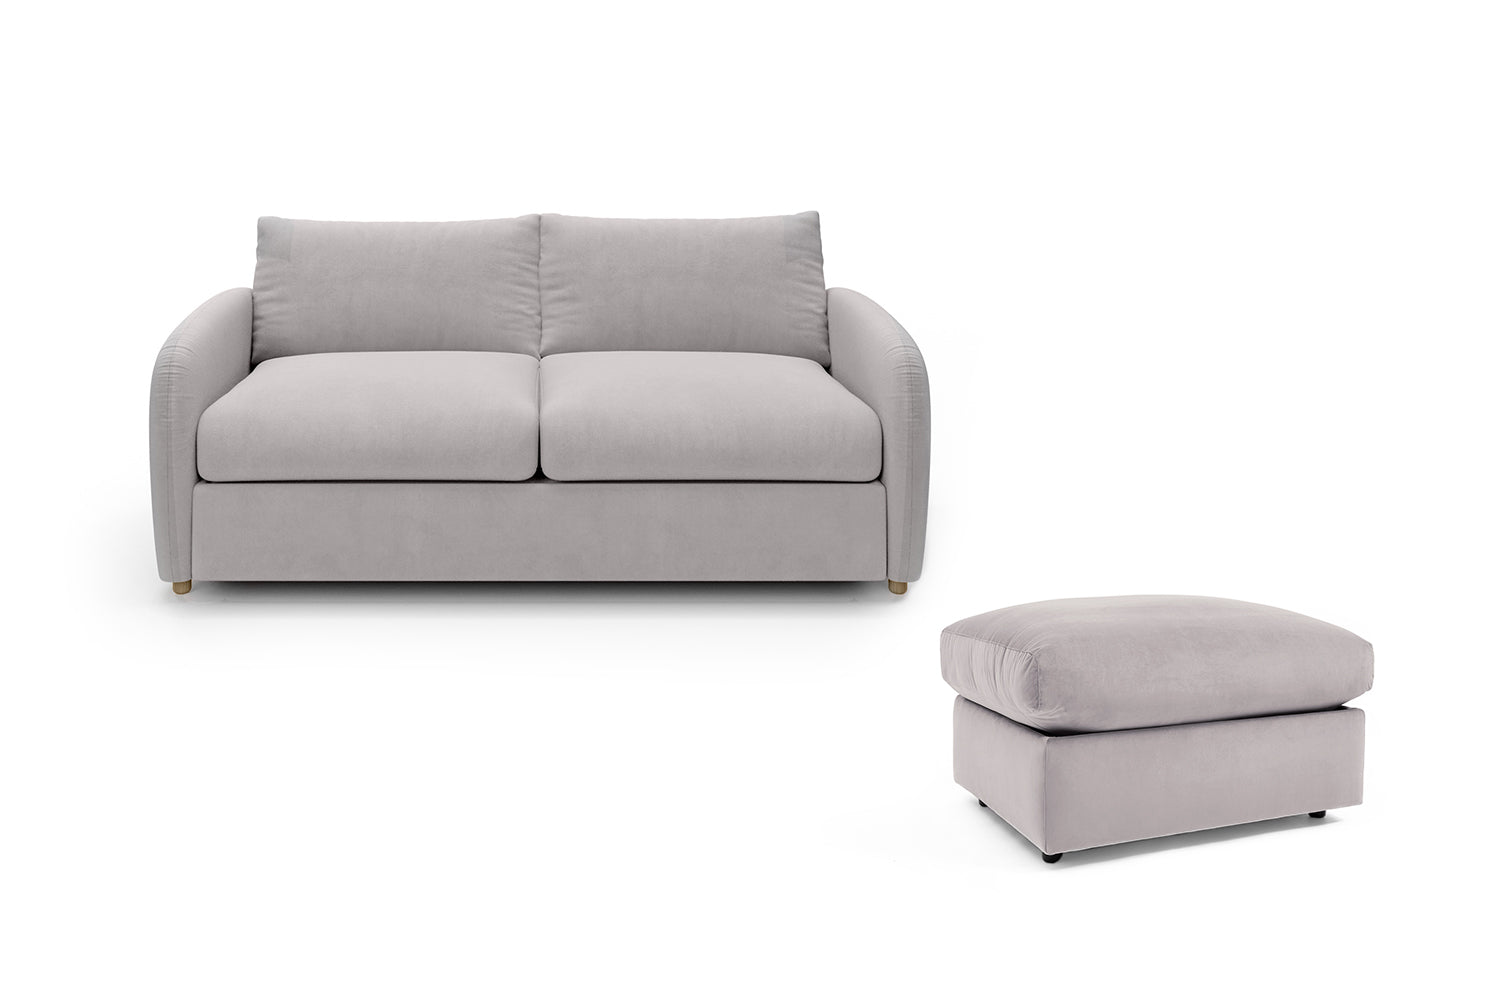 The Small Biggie - 3 Seater Sofa and Footstool Set - Warm Grey